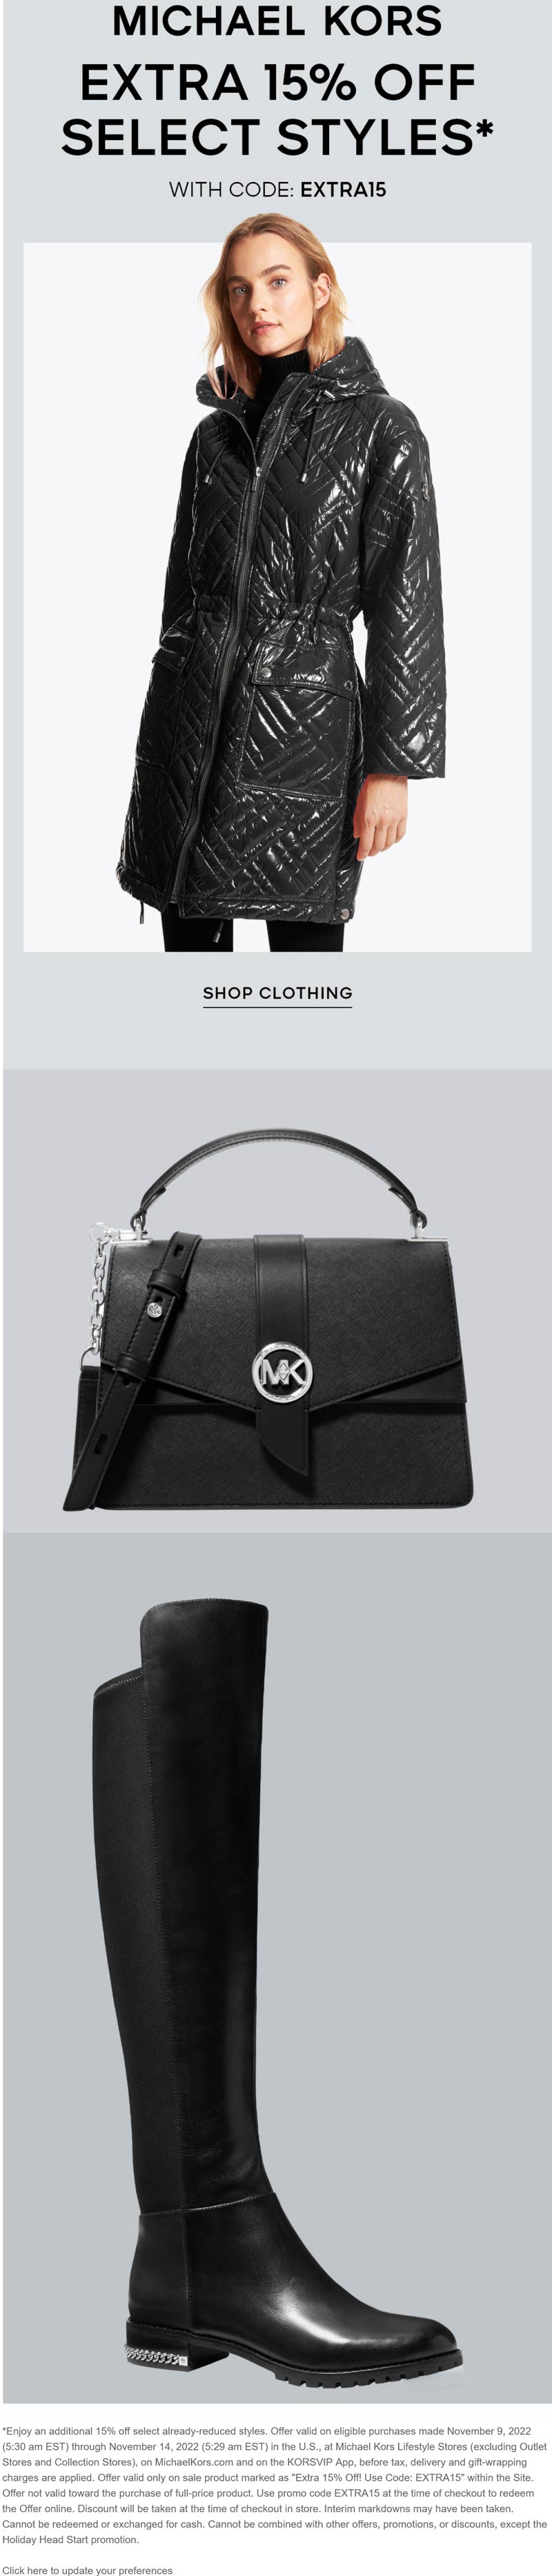 Michael Kors stores Coupon  Extra 15% off at Michael Kors, or online via promo code EXTRA15 #michaelkors 